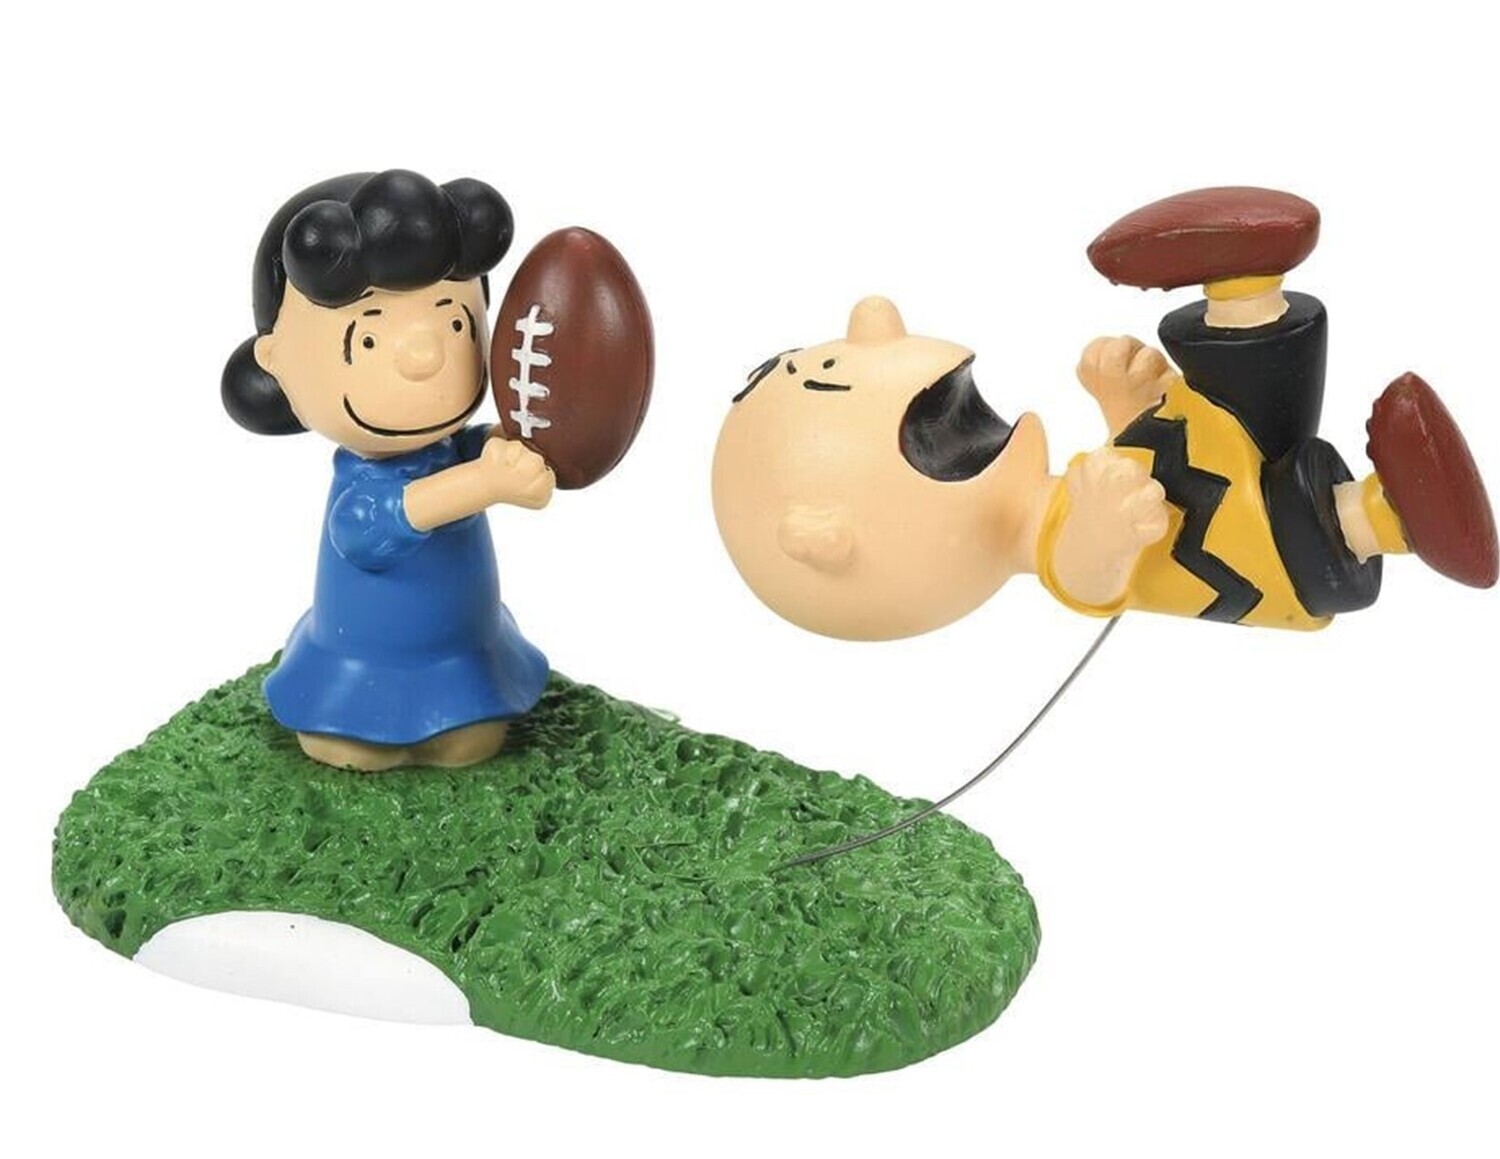 Department 56 Peanuts Village "A Fall Tradition" Charlie Brown & Lucy Figurine (6007738)